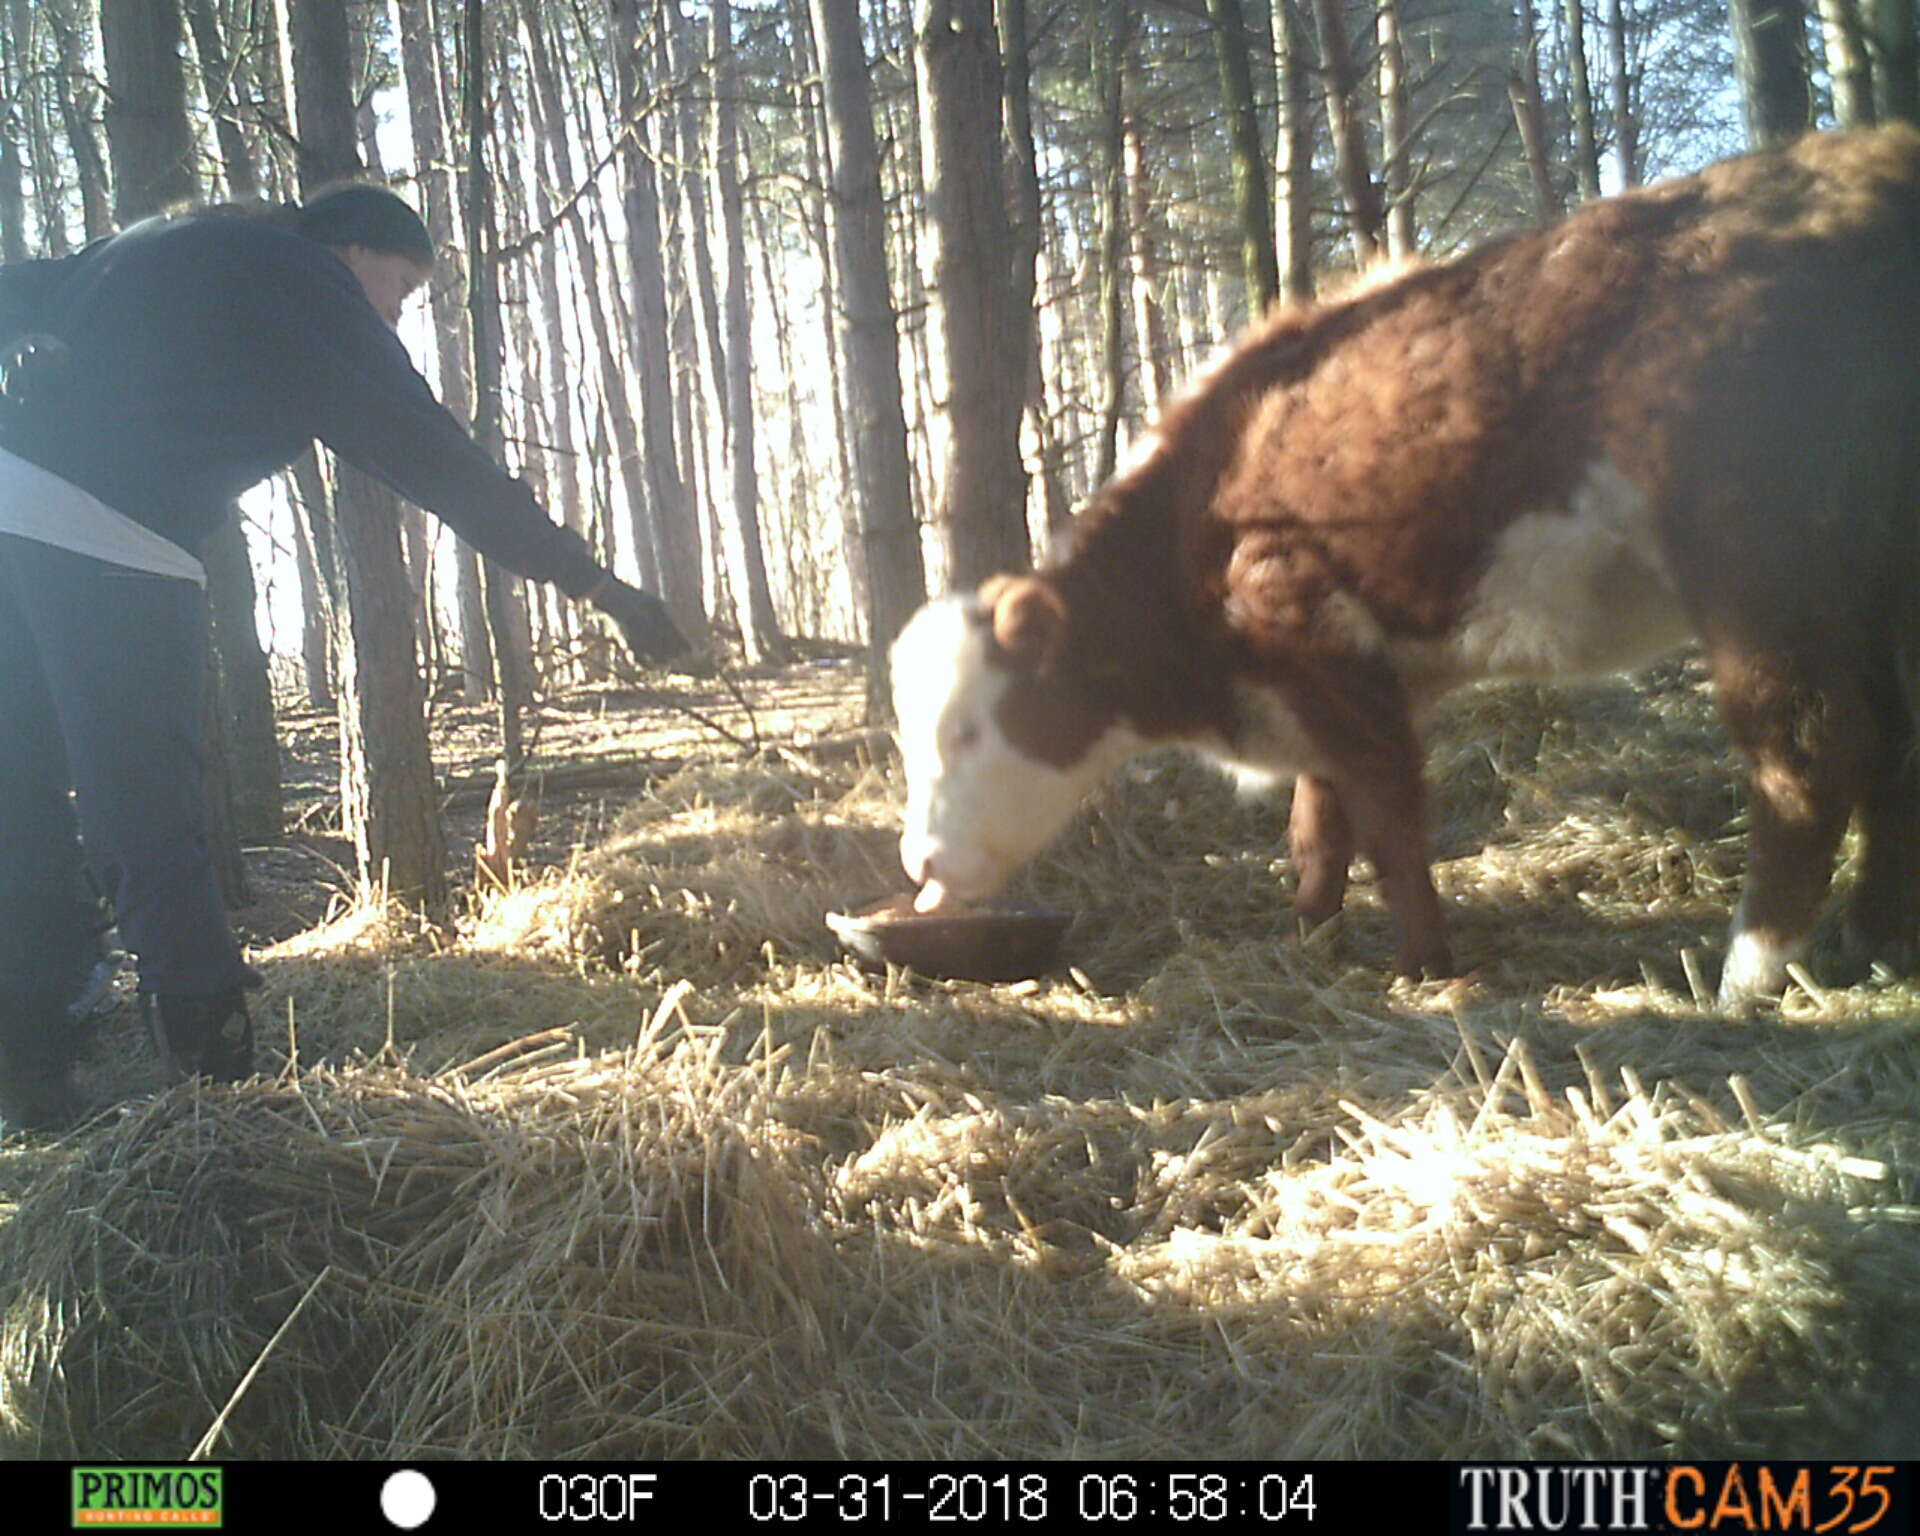 Resident feeding cow who lived in the woods